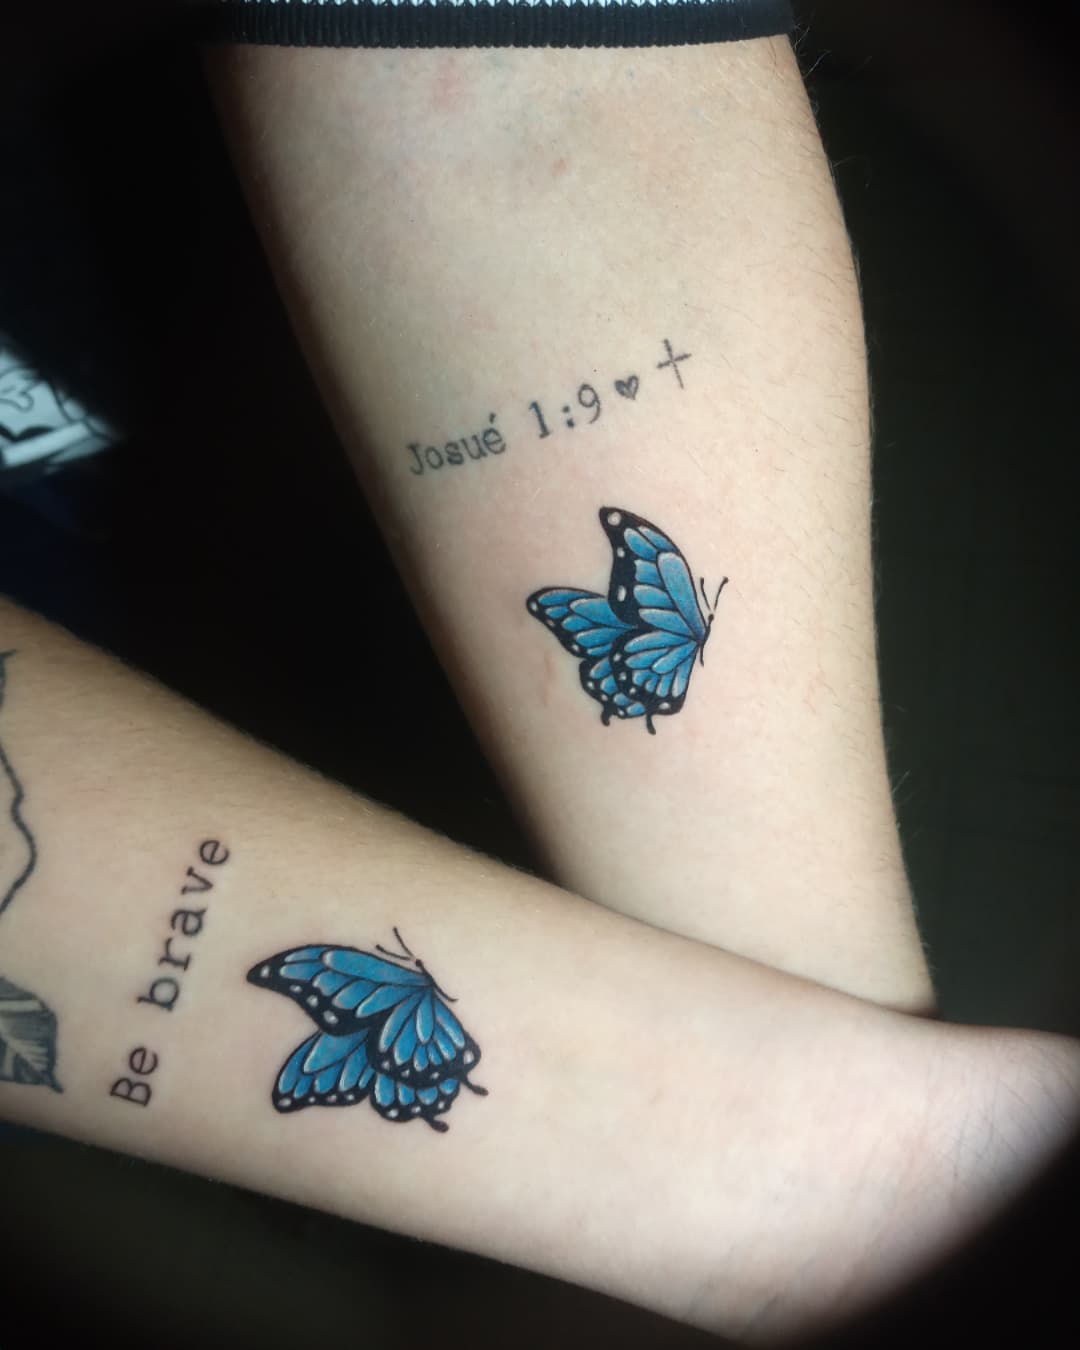 30+ Best Butterfly Tattoos Design You’ll Love To Get Next. Blue Butterfly Tattoo Designs